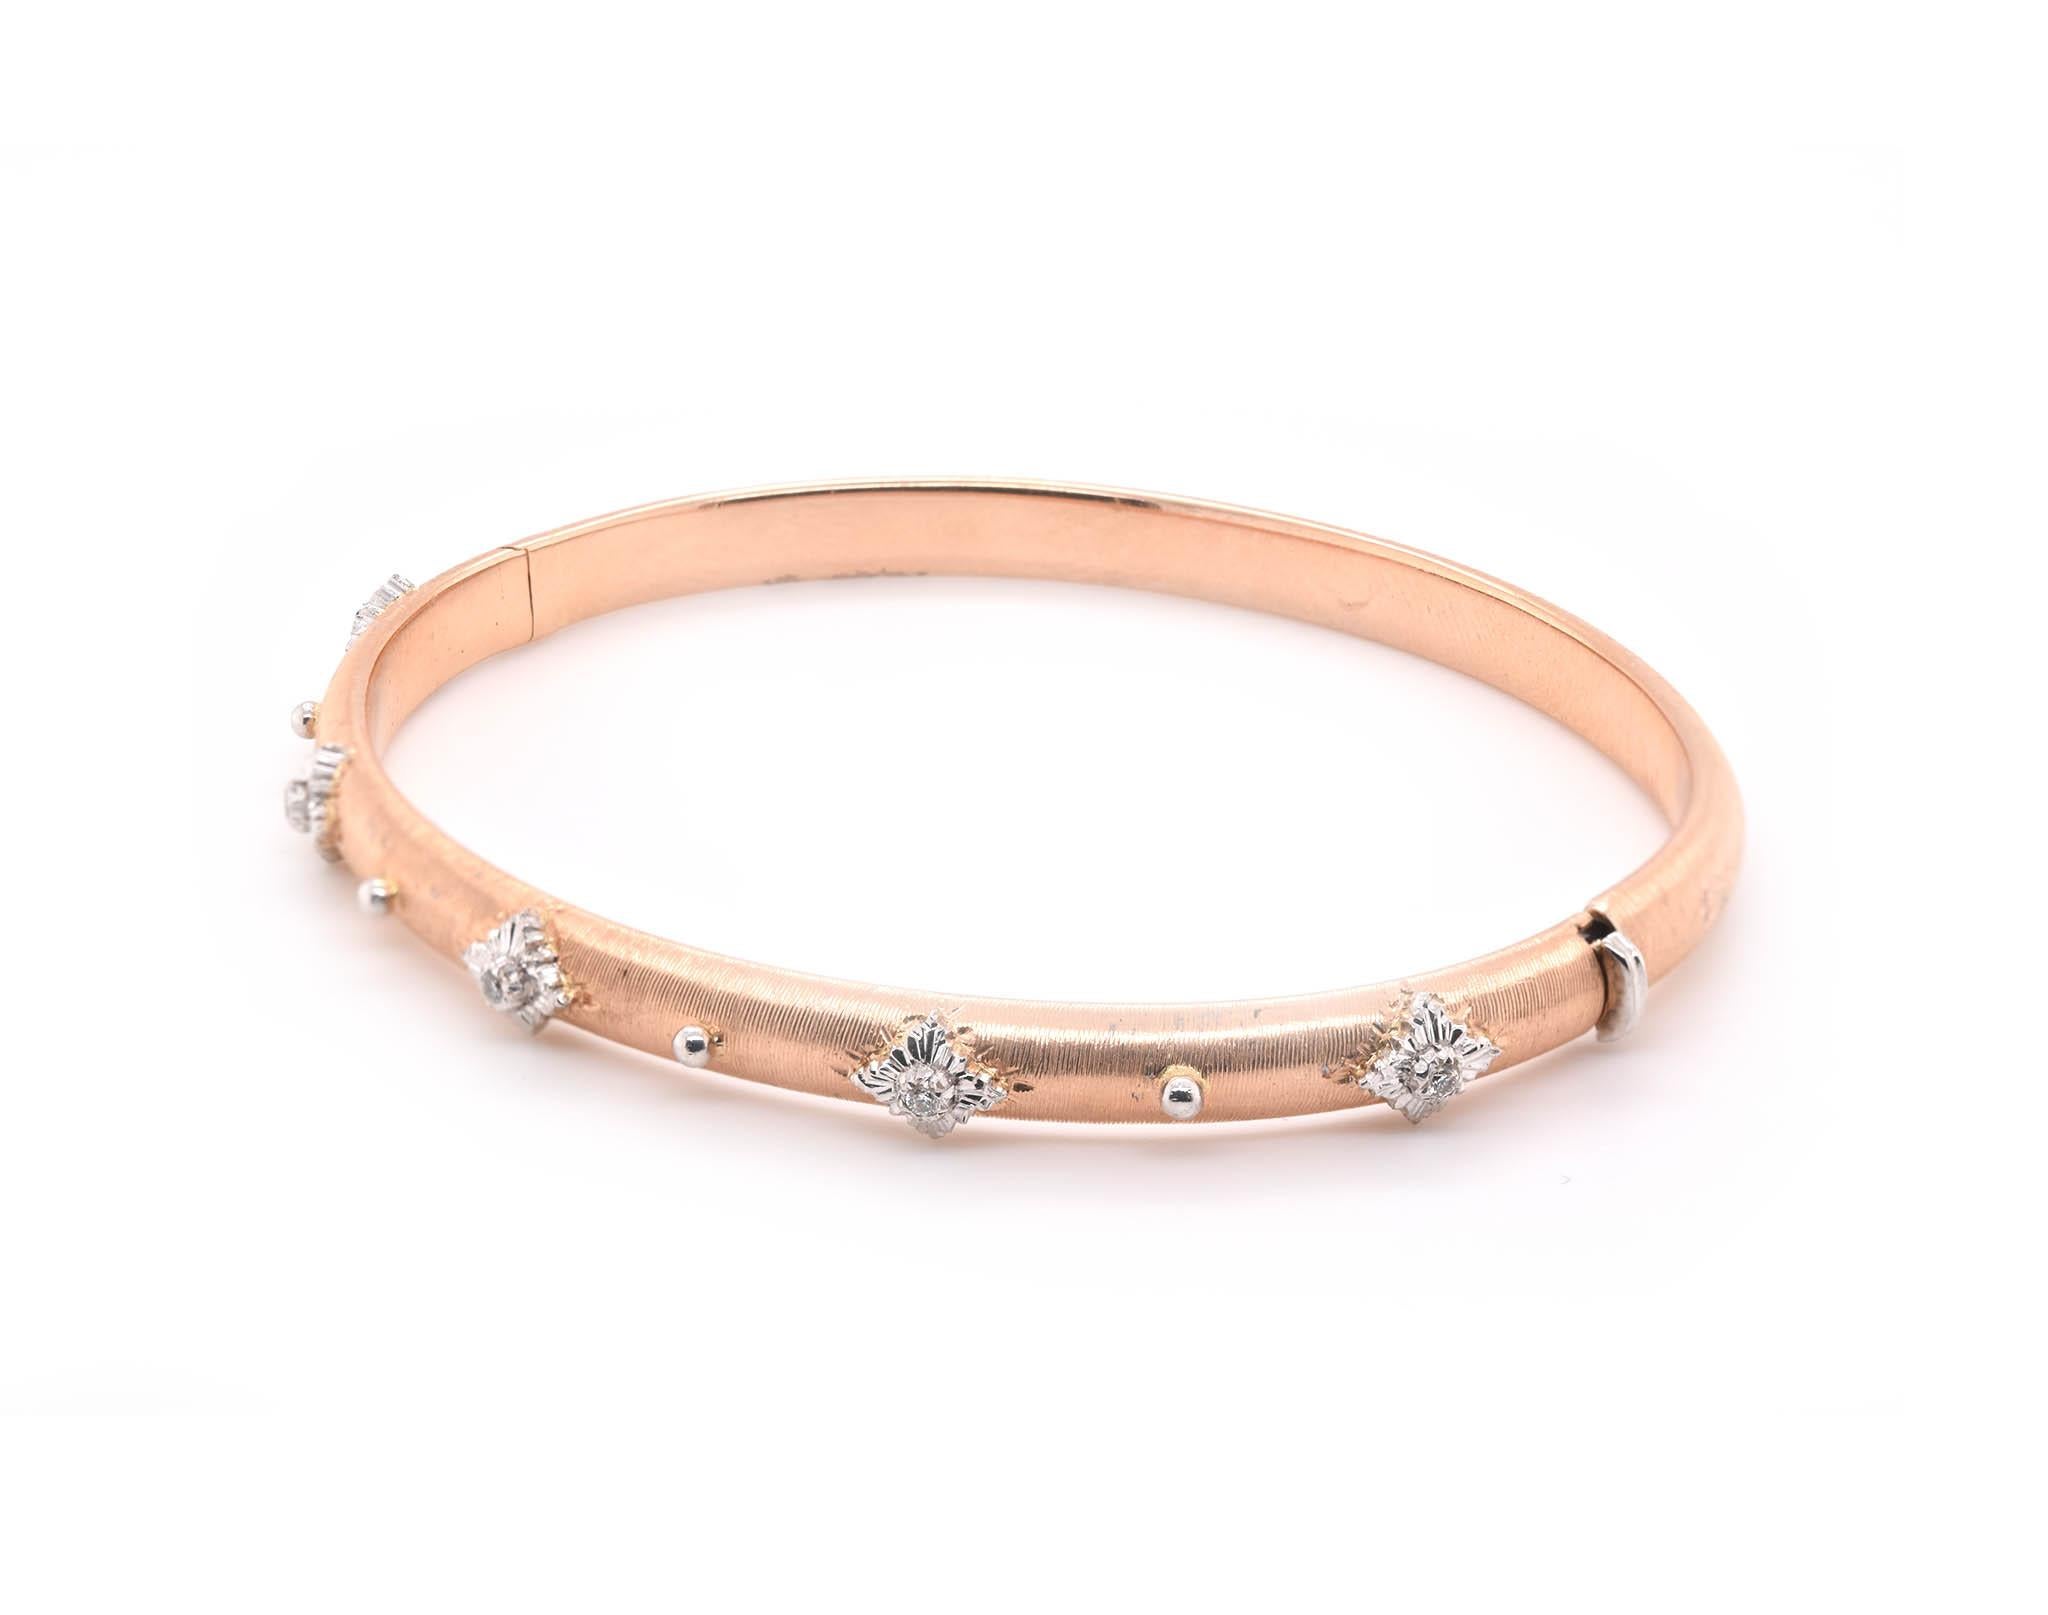 Designer: custom
Material: 18k rose and white gold
Diamonds: 5 round brilliant cuts= .06cttw
Color: G
Clarity: VS
Dimensions: bracelet will fit up to a 7 1/2 ich wrist 
Weight: 9.26 grams